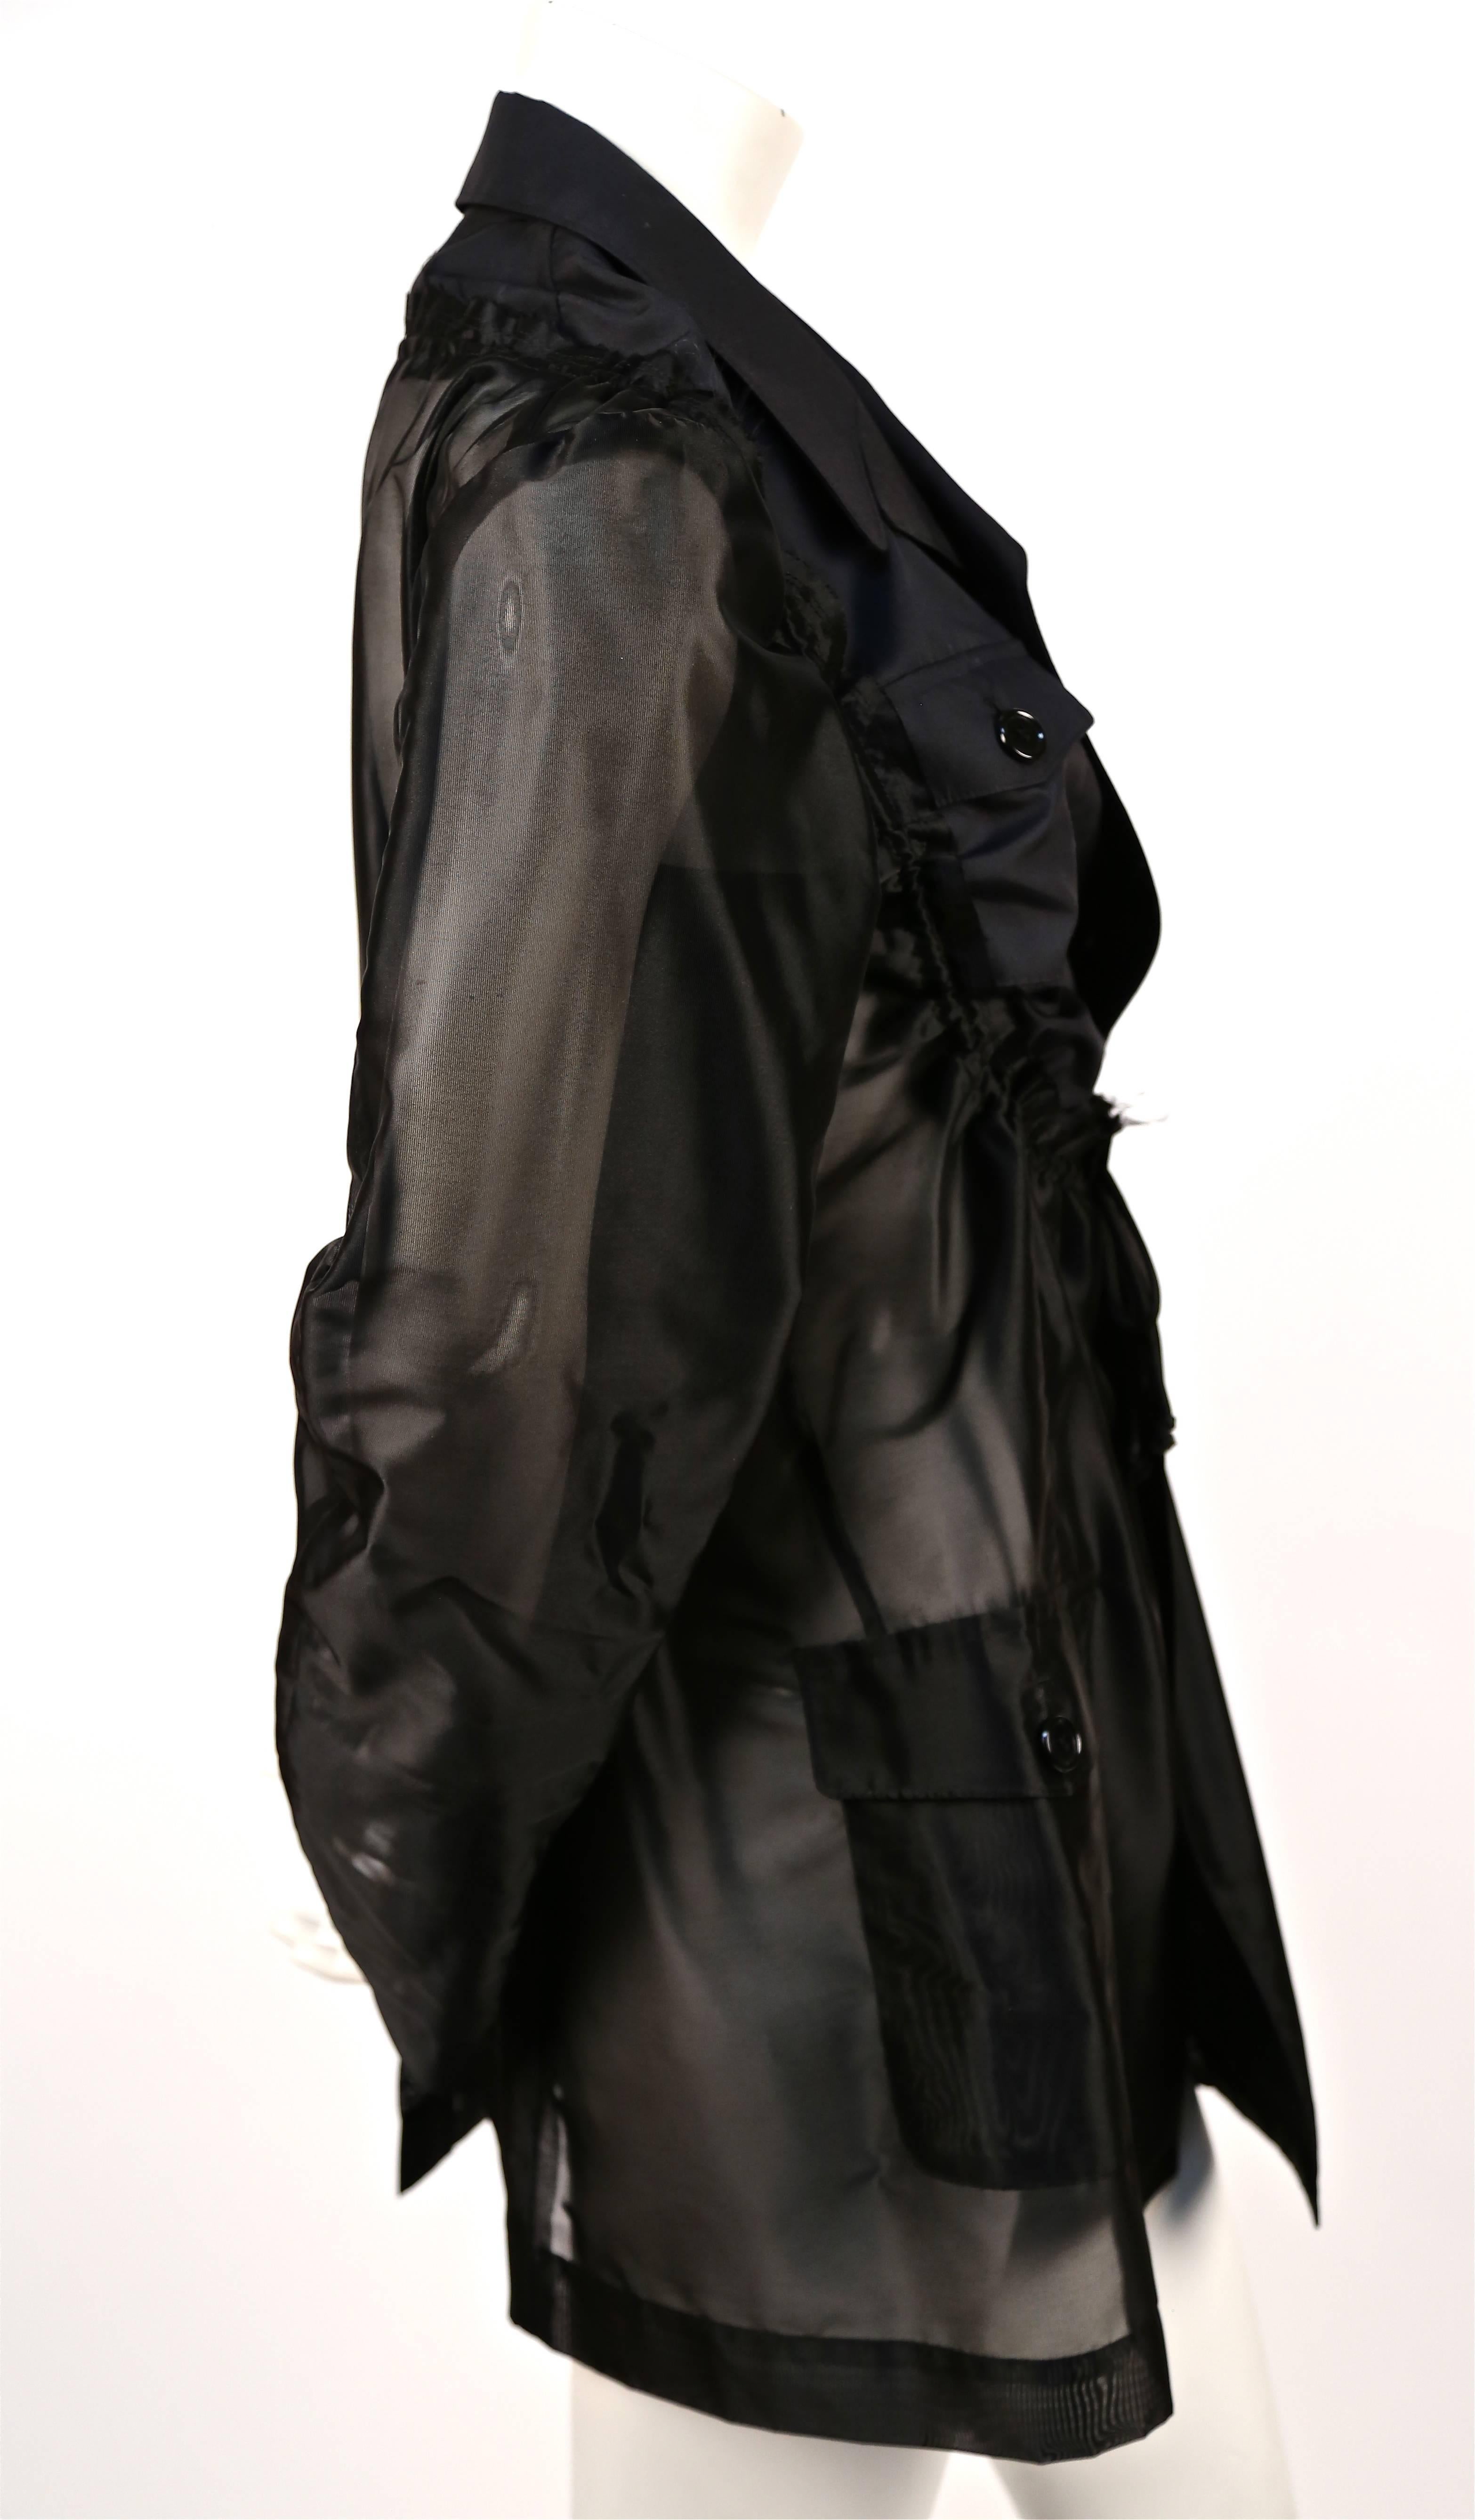 Jet black sheer jacket with adjustable ruched bib from Comme Des Garcons dating to 2002 as seen on the runway. Labeled a size 'M'. Approximate measurement: shoulder 16", bust 35.5", arm length 25" and overall length 30". Button